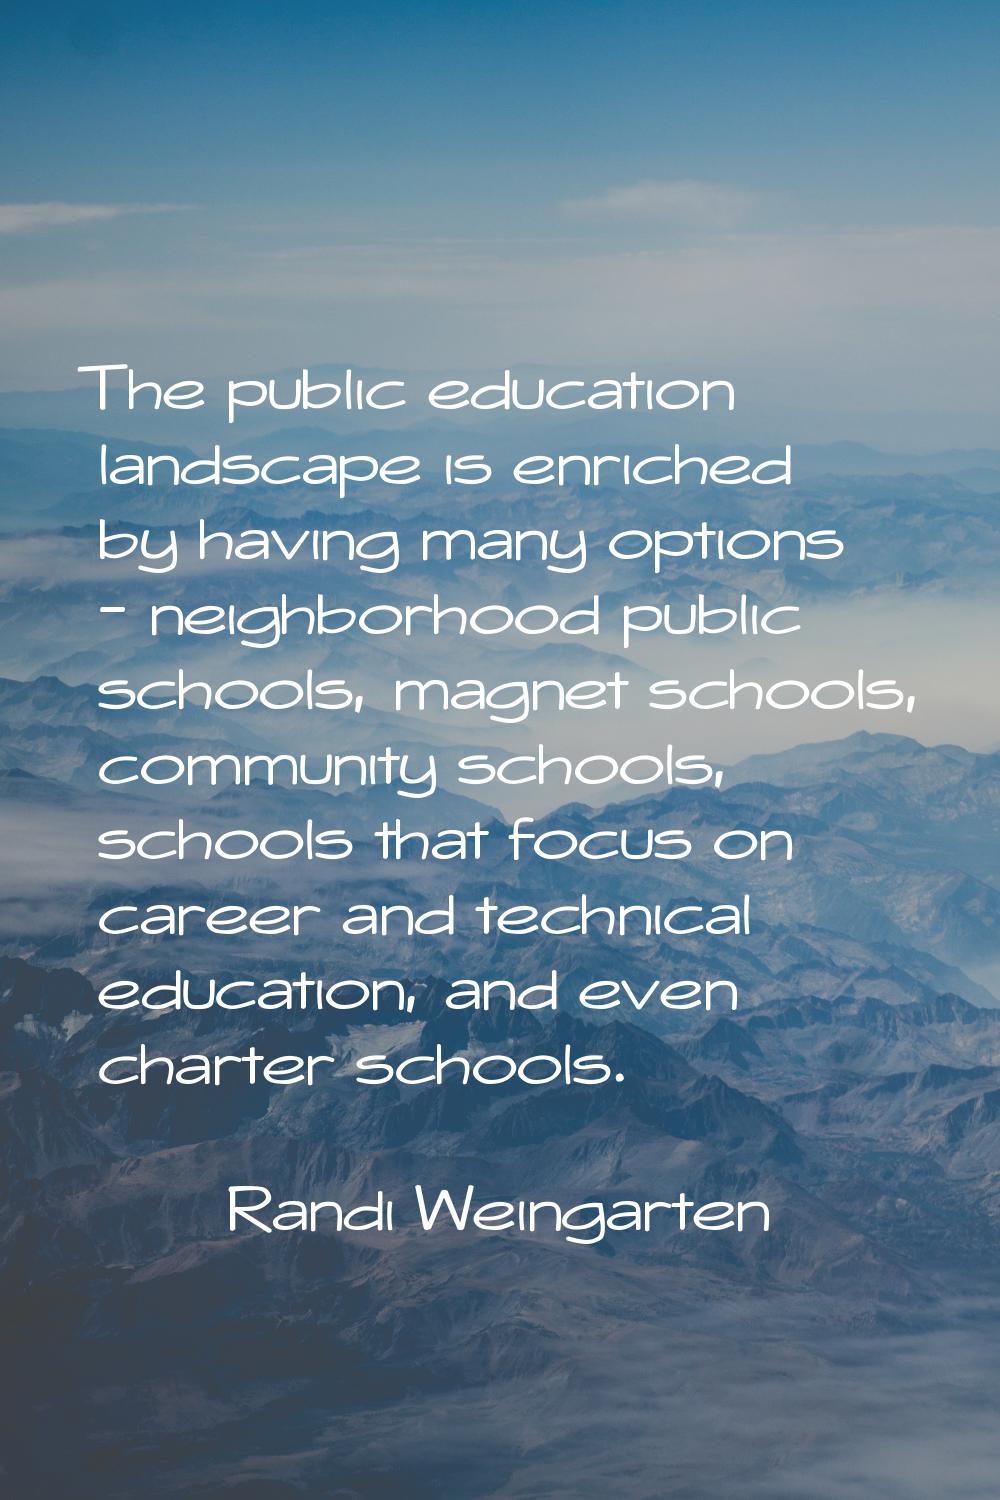 The public education landscape is enriched by having many options - neighborhood public schools, ma